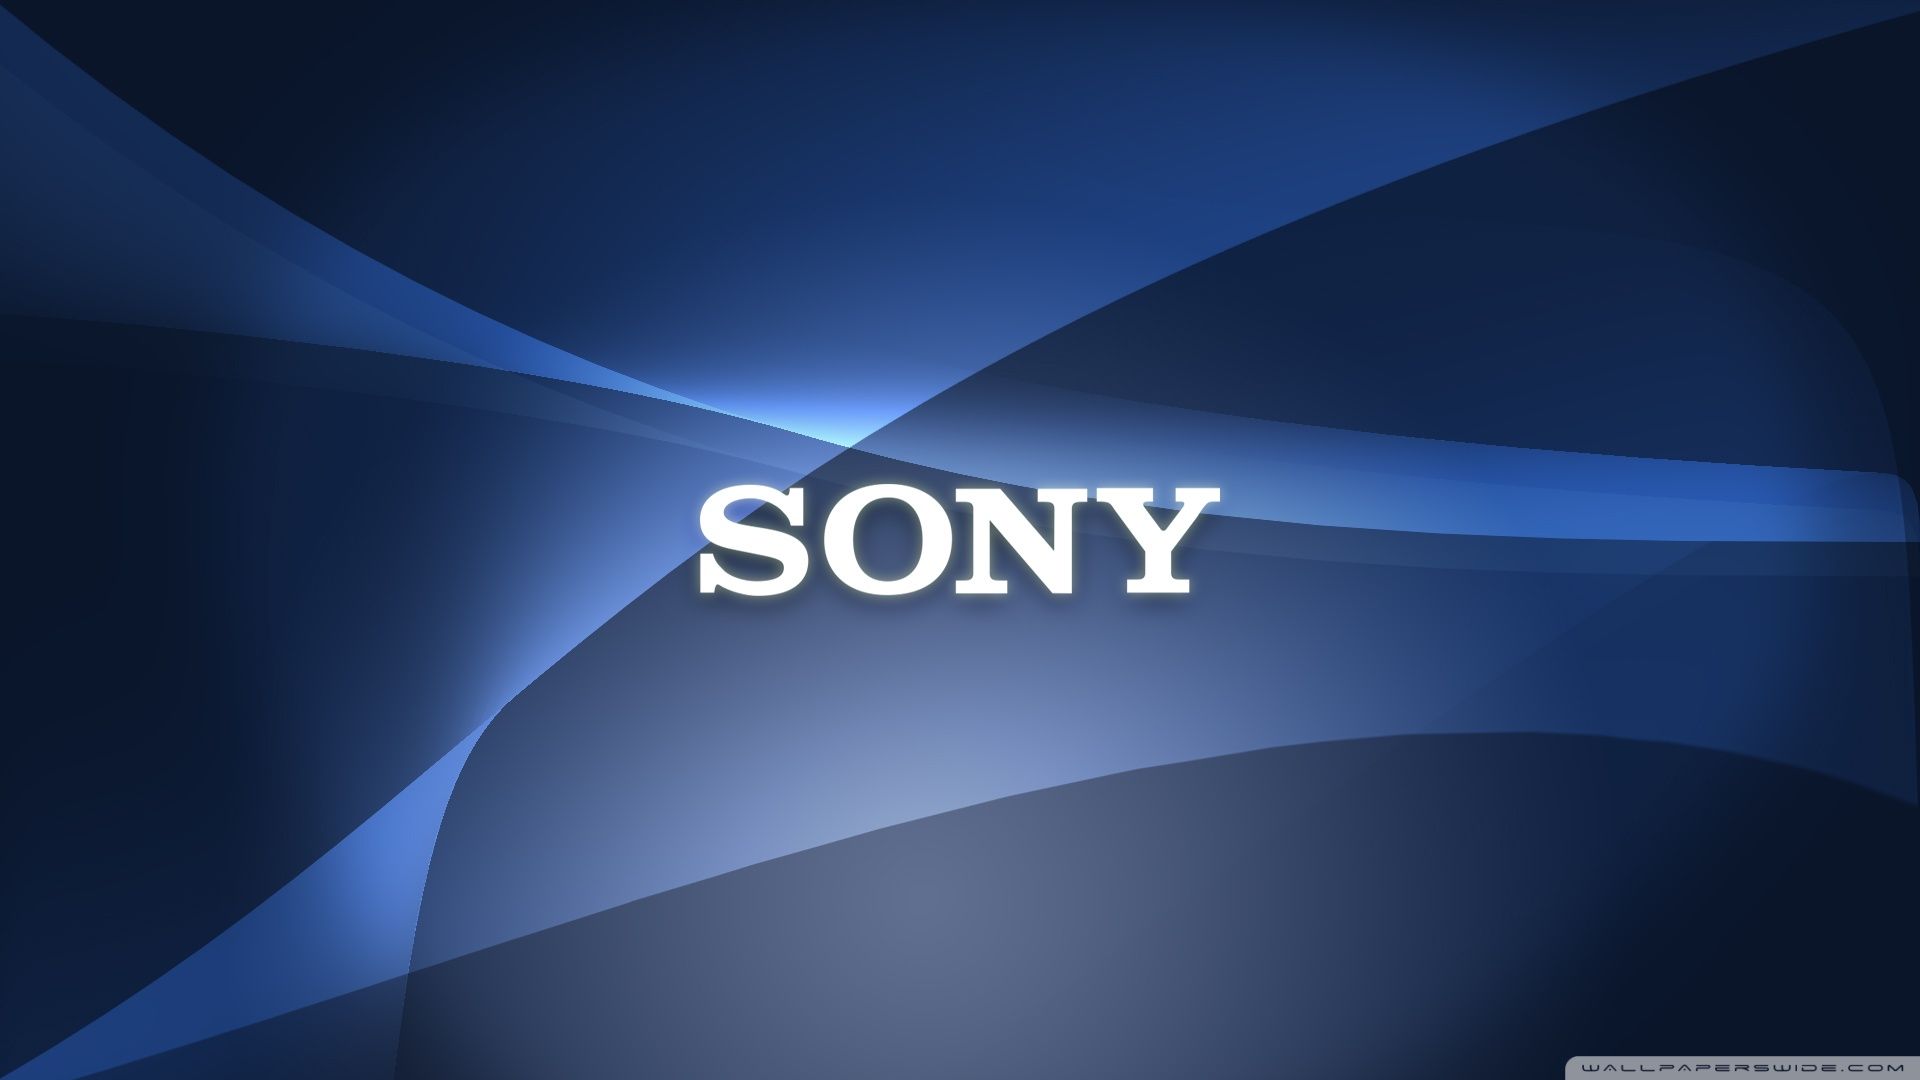 Sony Wallpapers on WallpaperDog